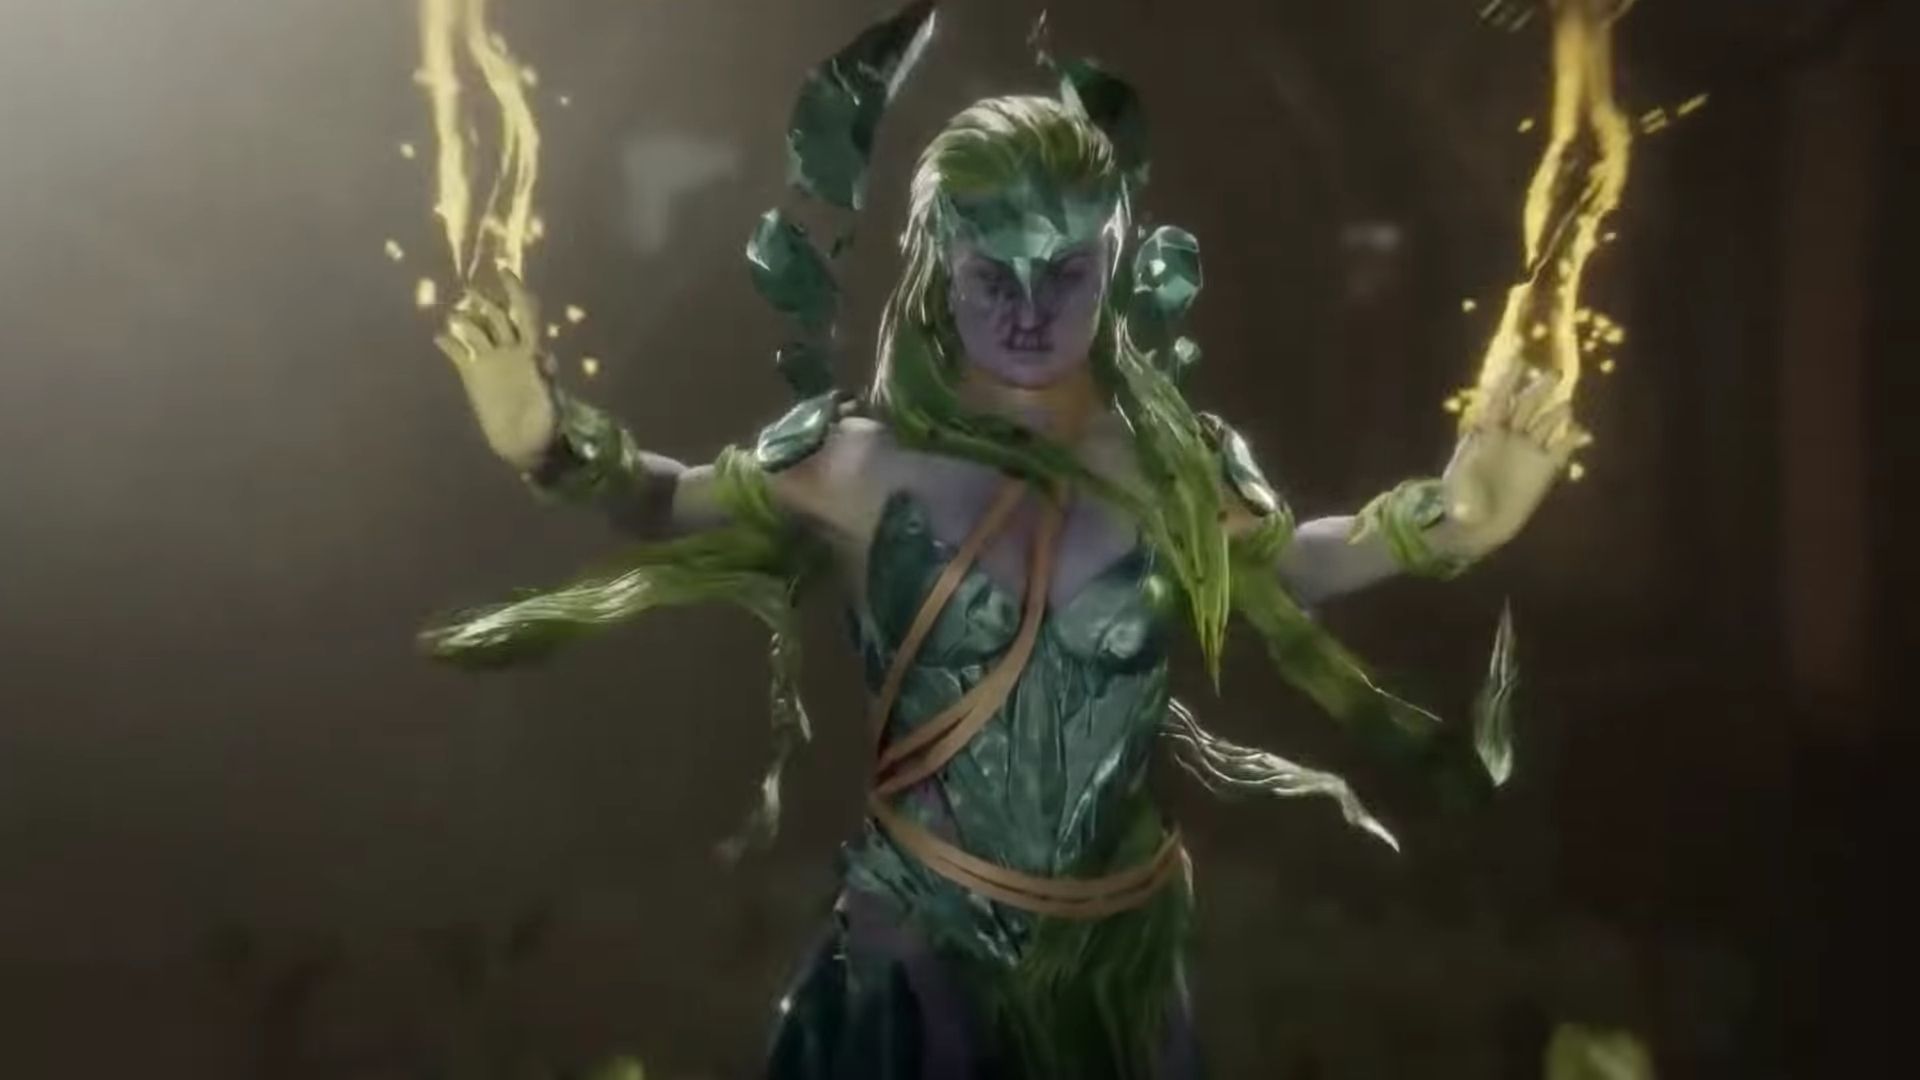 Don't know if you guys noticed this, but cetrion is bleeding